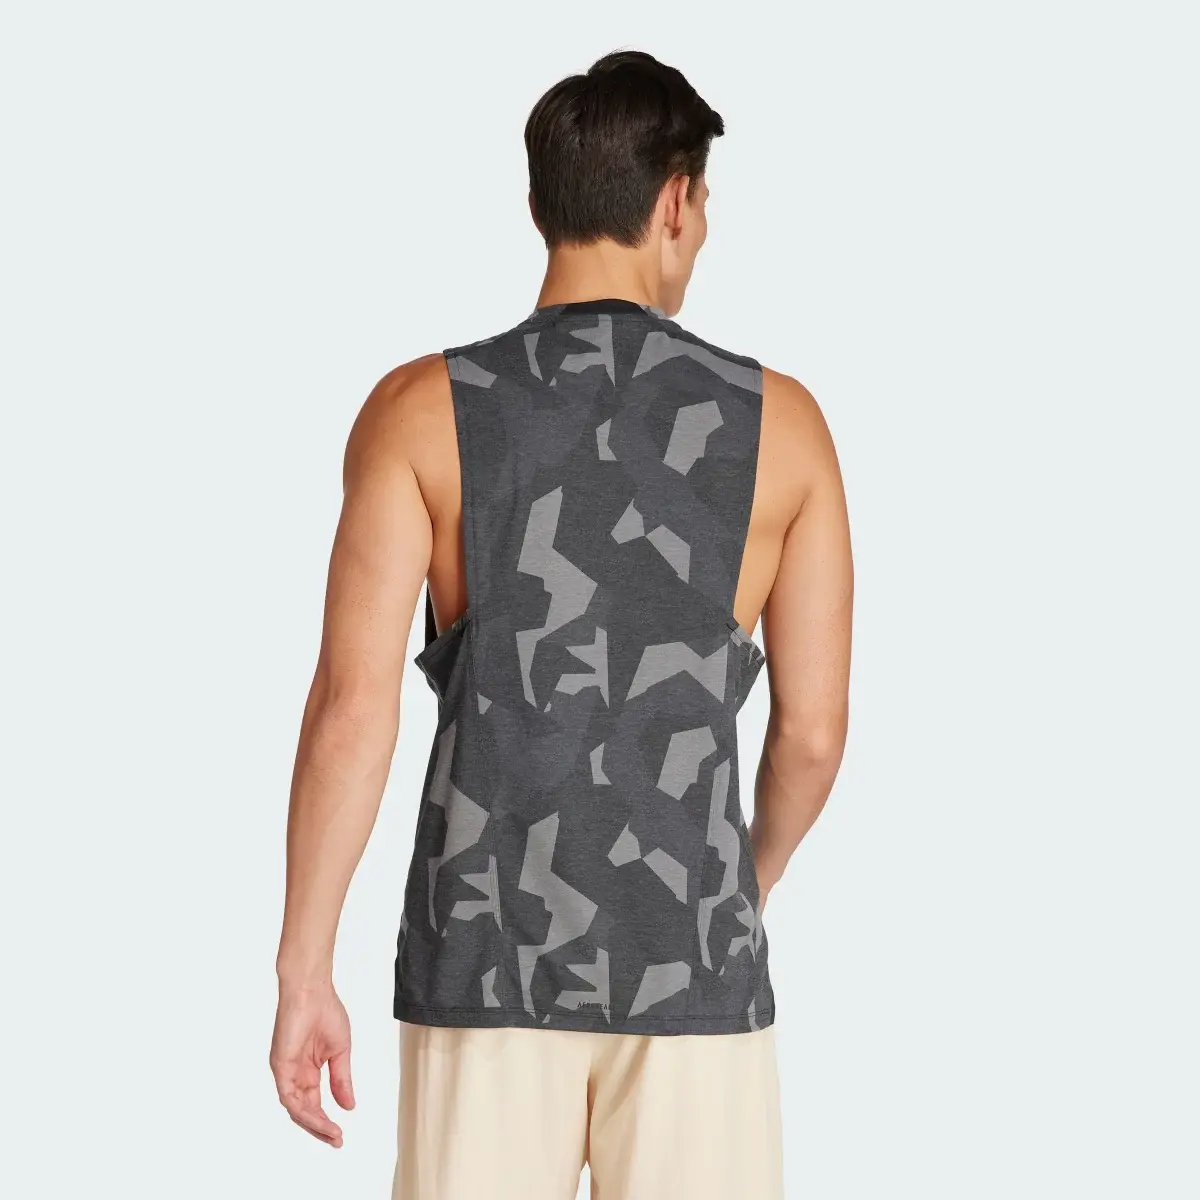 Adidas Designed for Training Pro Series Workout Tank Top. 2